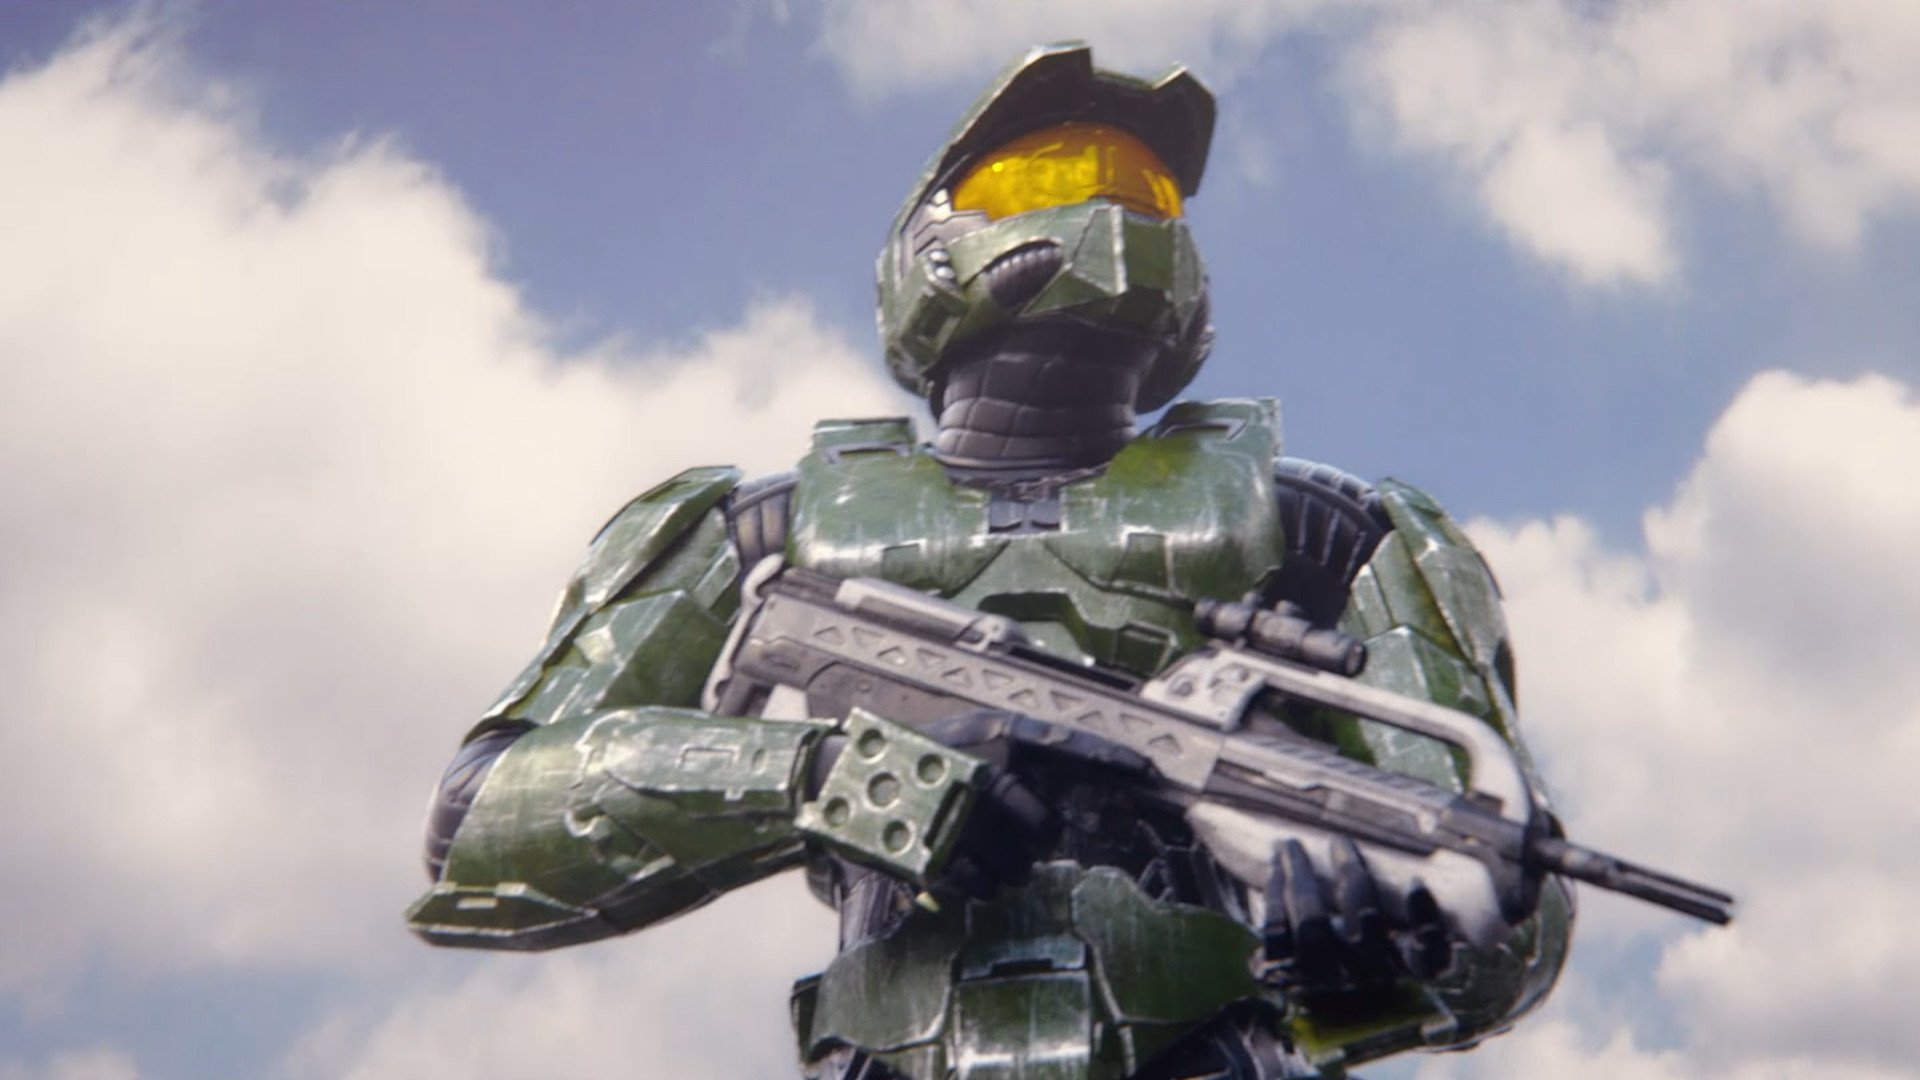 The Halo TV series will show a different side of Master Chief, 343